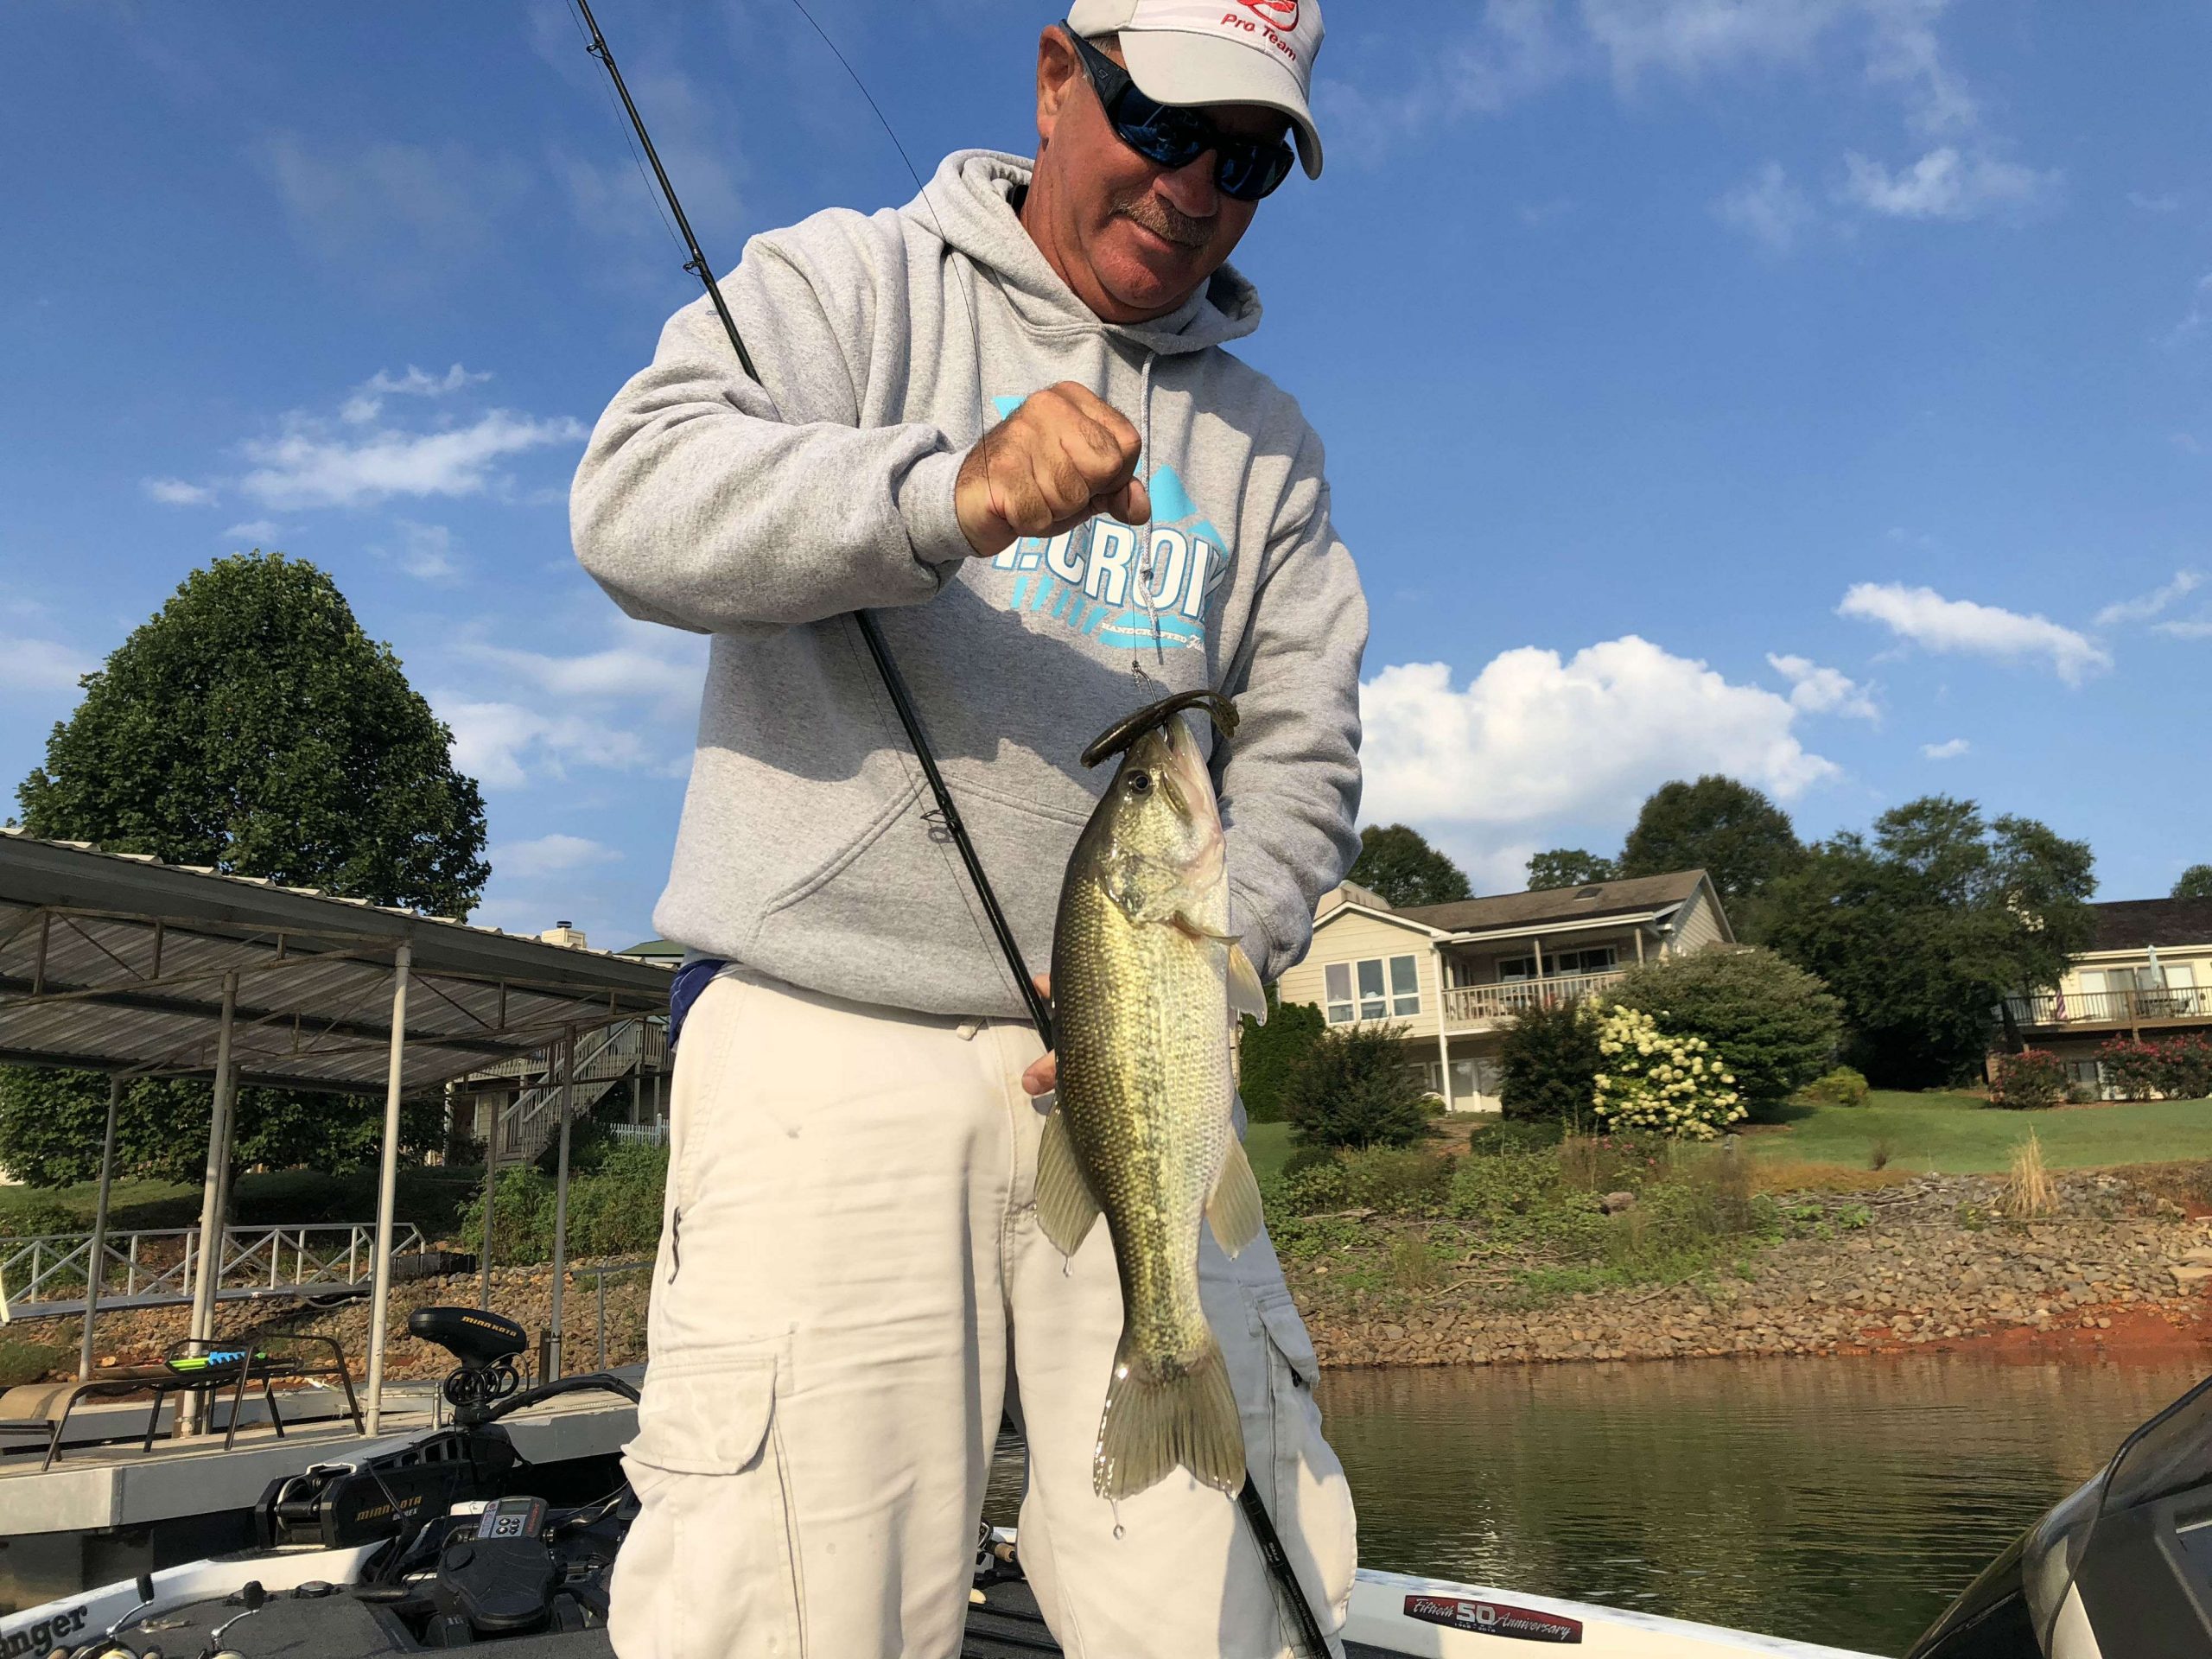 Veteran Scott Rook will fish in the Classic Bracket in hopes of qualifying for perhaps his final Bassmaster Classic. Rook is set to retire after the Classic Bracket and would like to go out with a bang and qualify for the 2019 Classic.